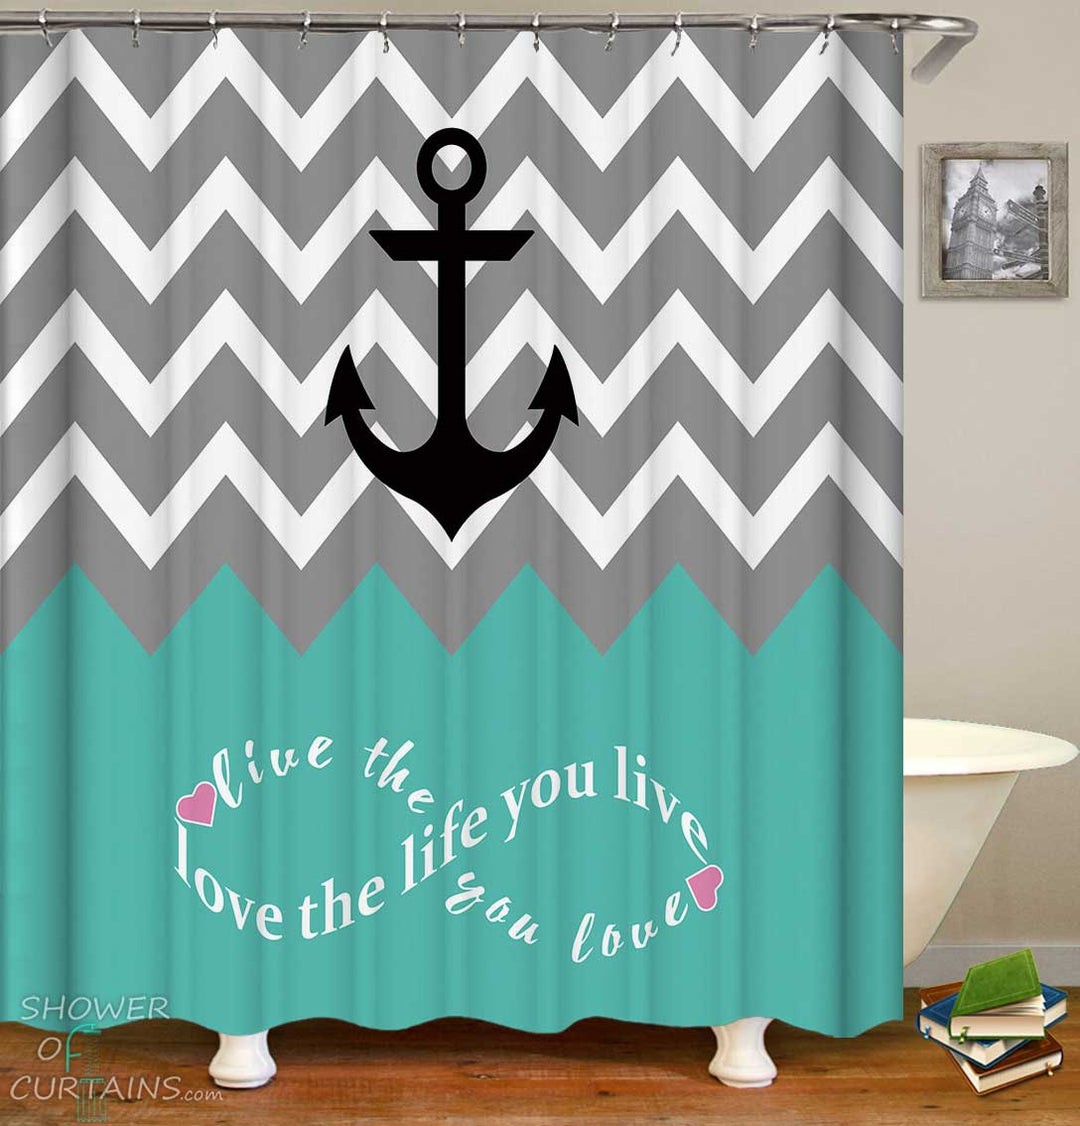 Shower Curtains with Anchor Inspirational Quote